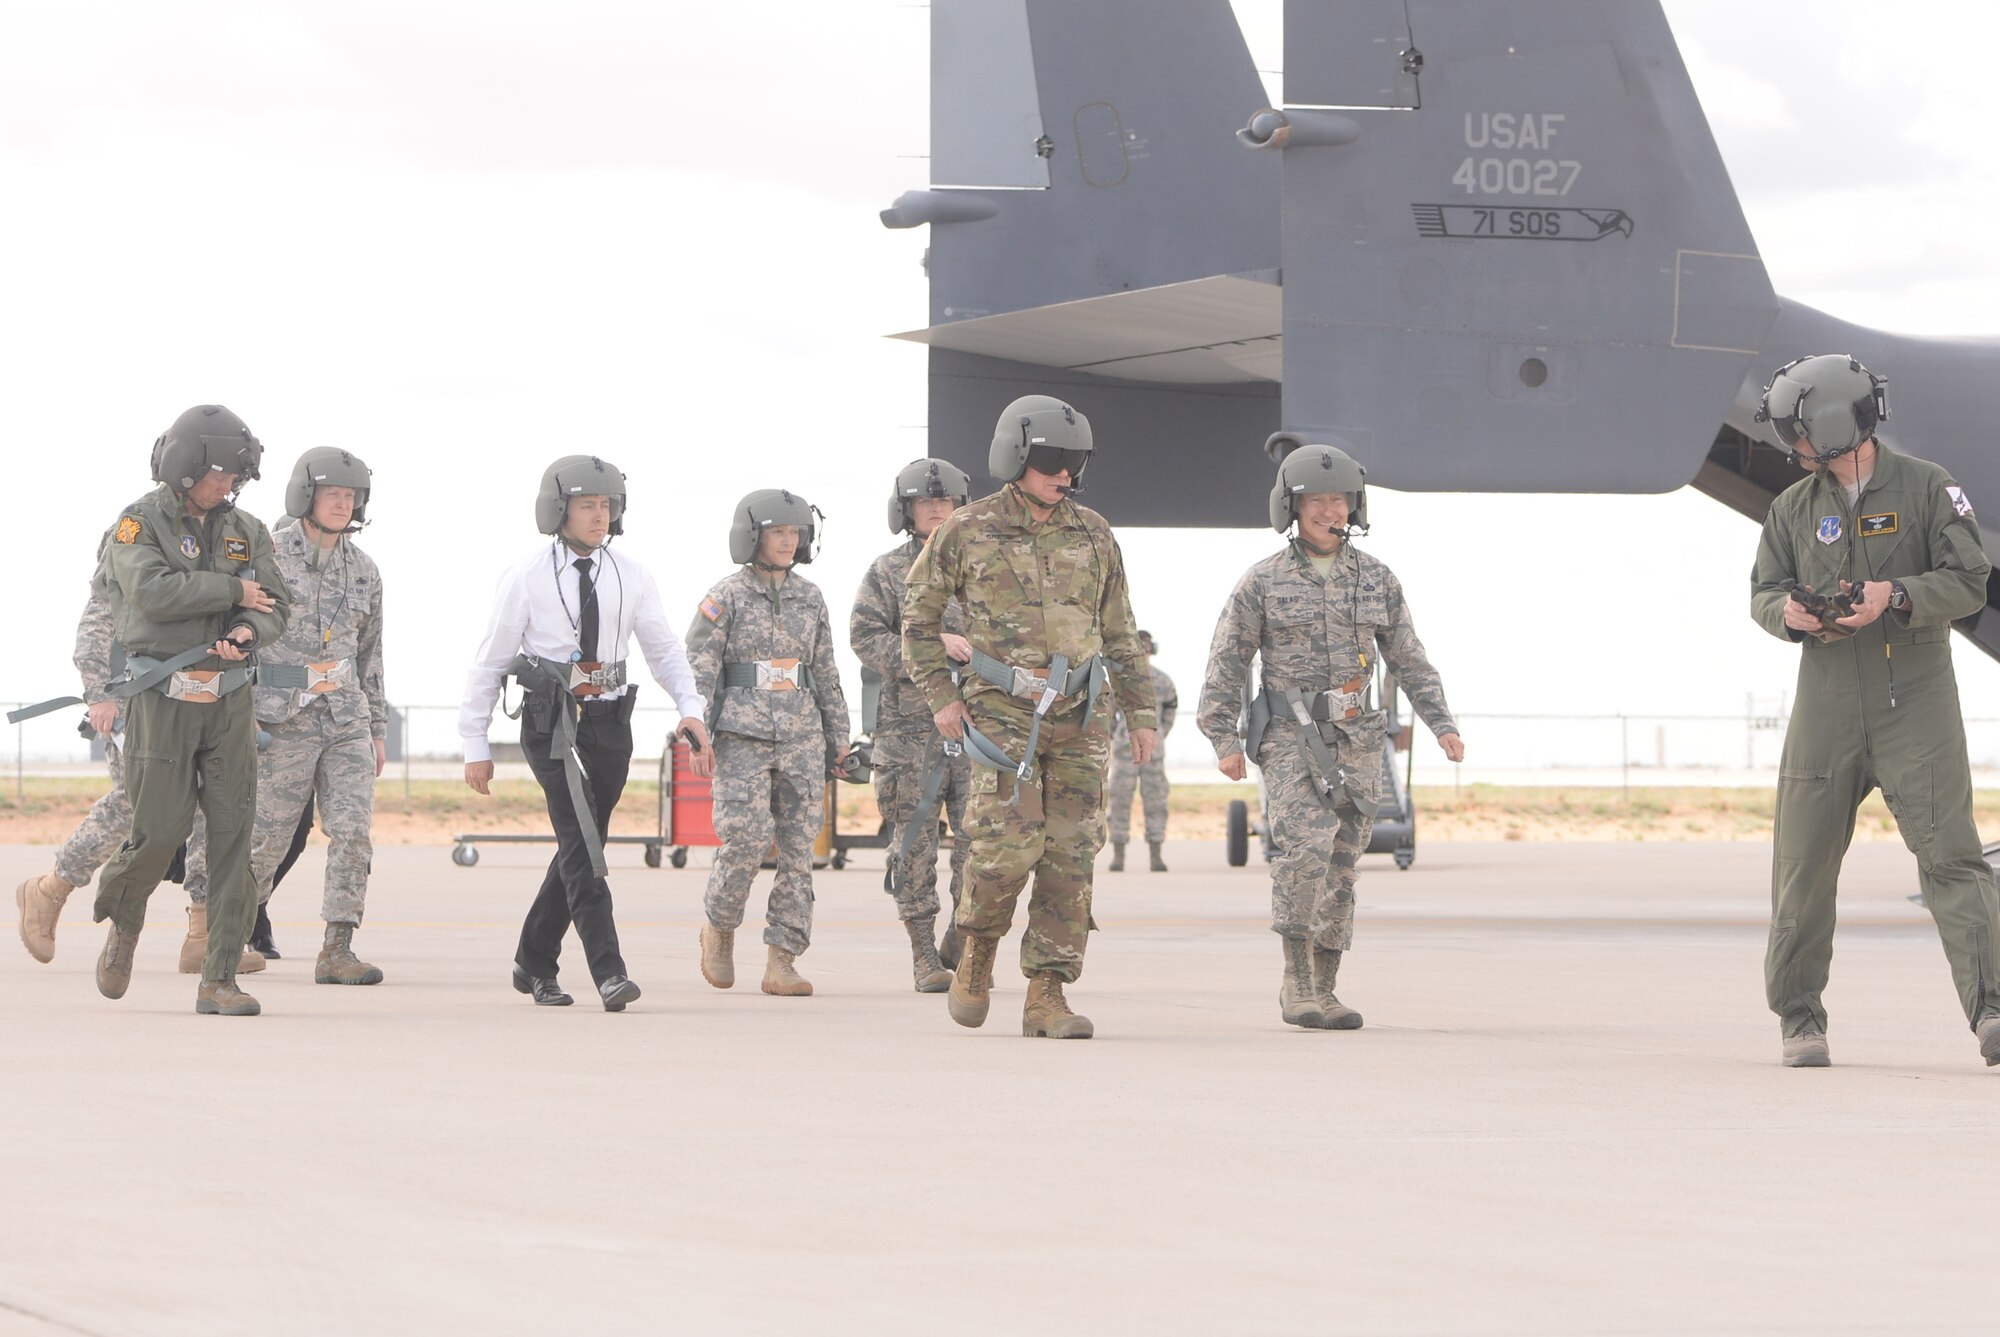 Gen. Frank J. Grass, Chief of the National Guard Bureau, toured New Mexico National Guard Apr. 29-30, 2016. Grass began his visit at the Army Aviation Support Facility then was flown via Army UH-60 Black Hawk to the southern section of New Mexico. He met with local Border Patrol officials as well as the leadership of the NMNG Counterdrug Program then toured the international border aboard an LUH-72 Lakota piloted and crewed by Army National Guardsmen. Grass spoke with the community of Kirtland Air Force Base in Albuquerque as well as flew on the CV-22 Osprey, piloted and crewed by Air National Guardsmen, in order to fully understand the plethora of capabilities in N.M. (U.S. Air Force photo by Tech. Sgt. Roberto Bilbao)